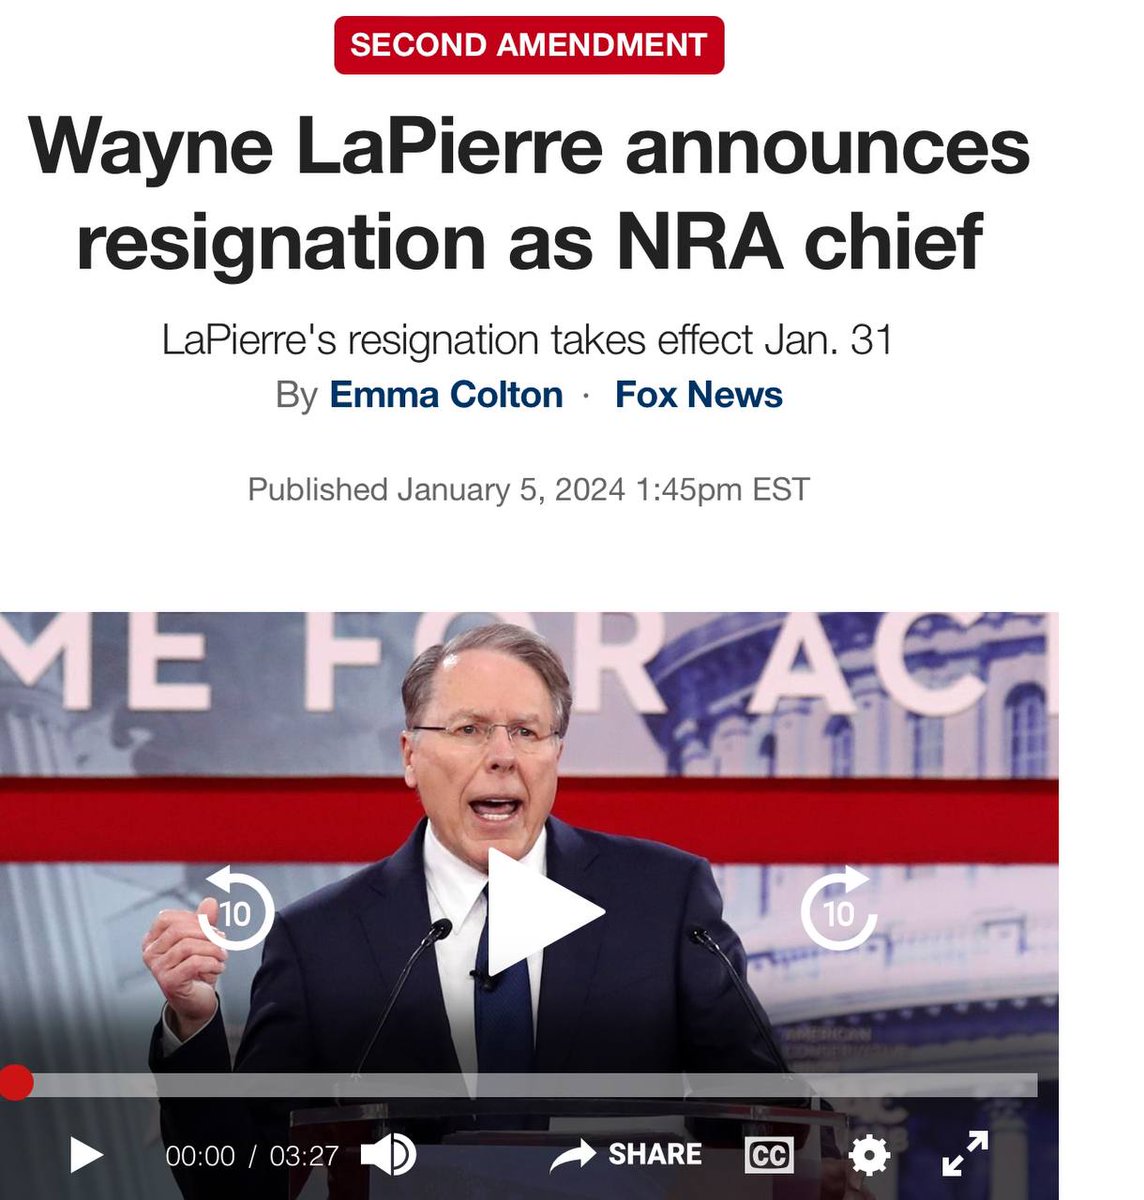 Why do y’all think he’s resigning?   Plea deal in NY?  Forced out due to tremendous drop in funds?   Finally, had enough $3K suits paid for by members?  🤨
#2a. #secondamendment
#nra #Finally #WayneLapierre